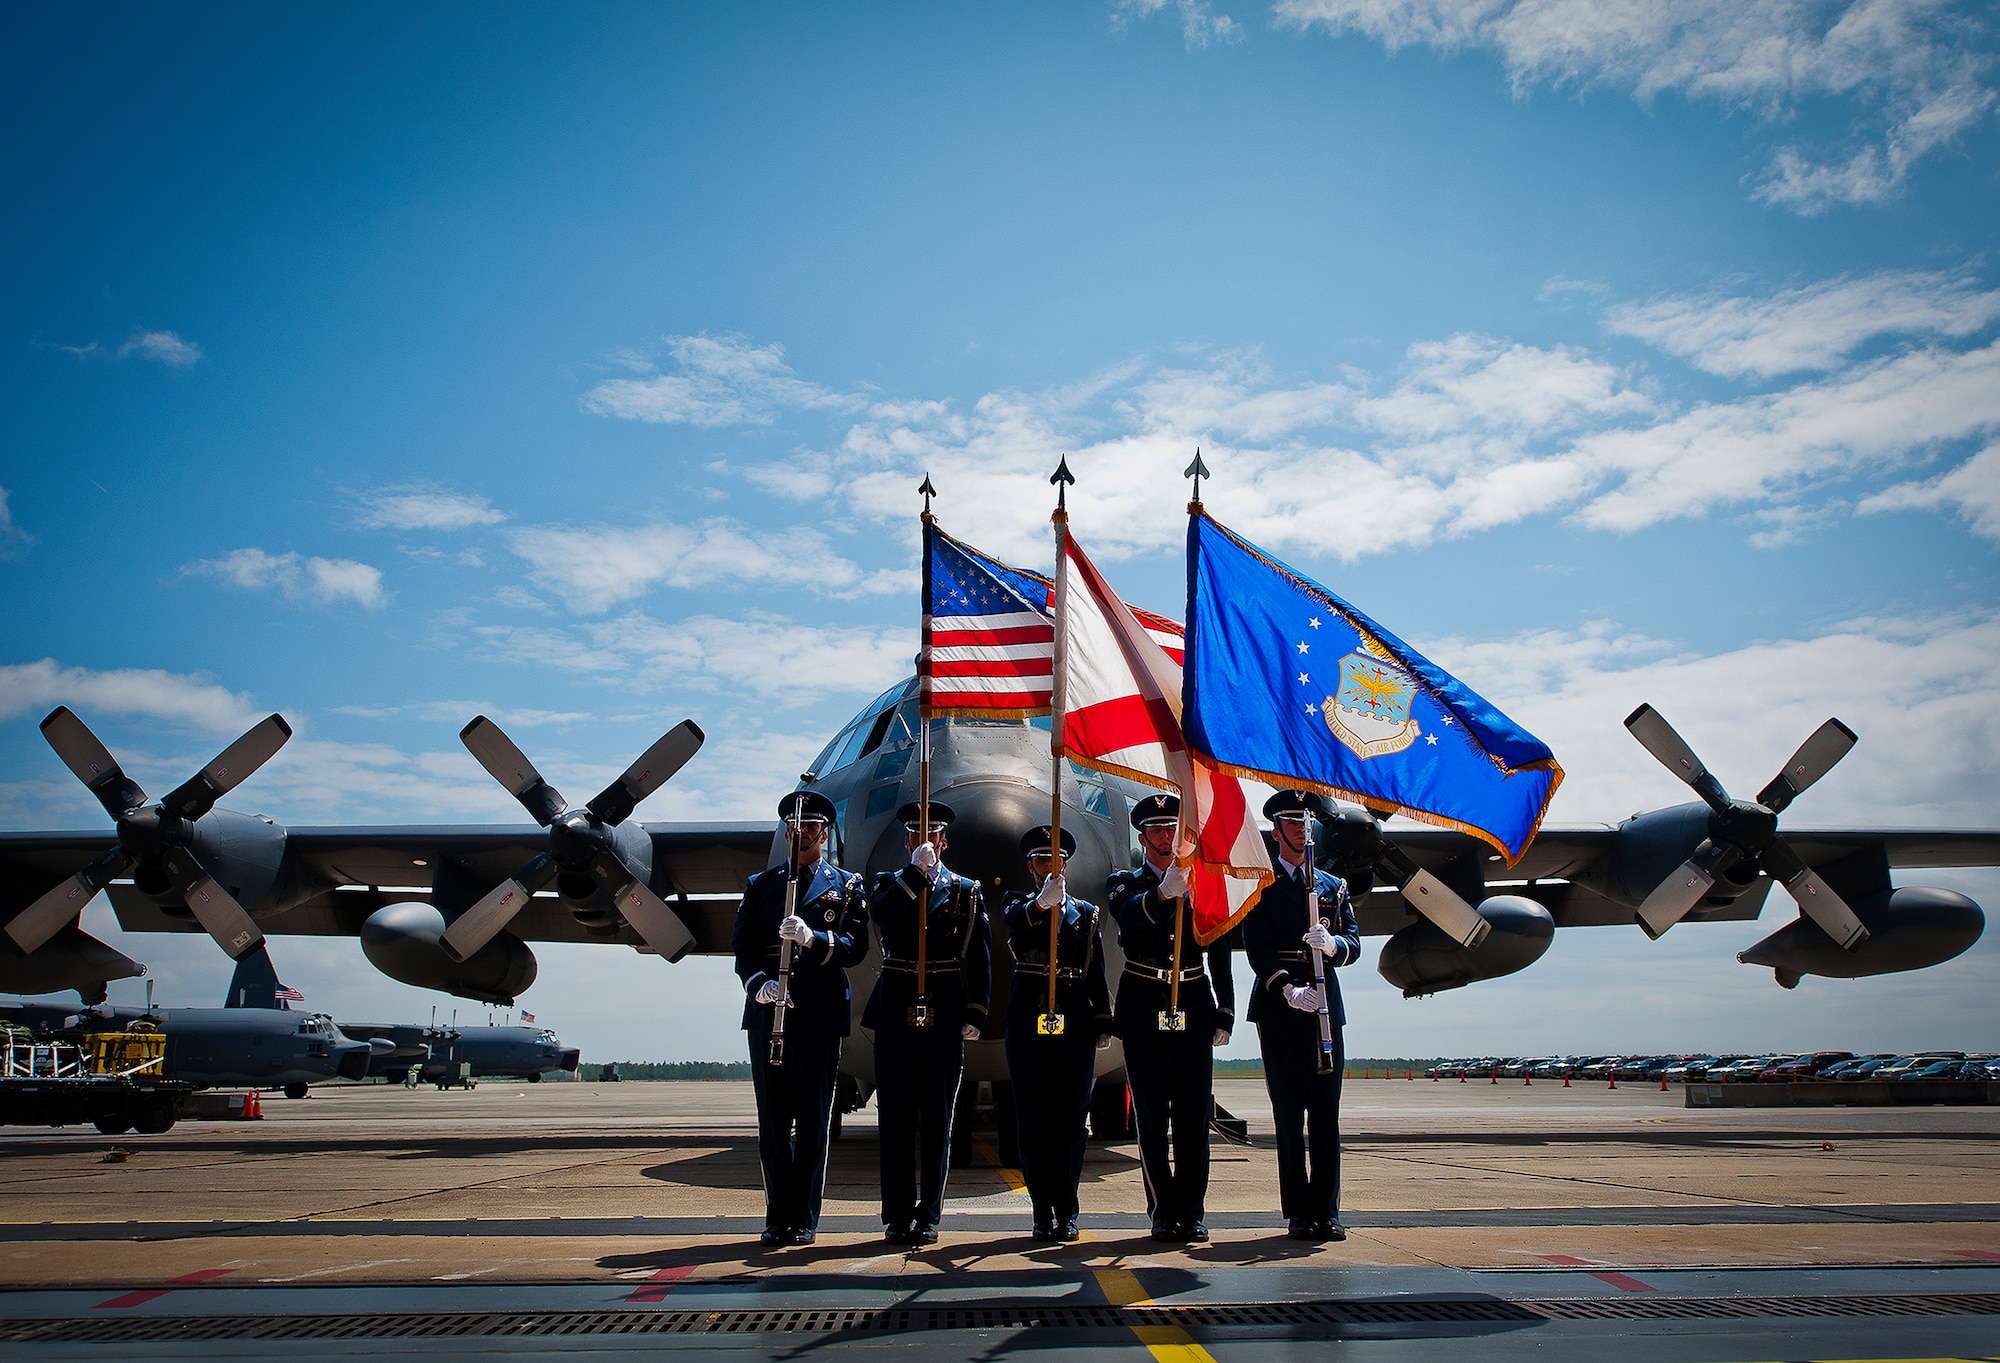 The Eglin Honor Guard presents the colors in the shadow of an MC-130E Combat Talon I during its retirement ceremony at Duke Field, Fla., April 25.  Aircrew, maintainers and many others turned out to remember and bid farewell to the Talon I on its official retirement from the Air Force.  The last five Talons, located at Duke Field, will be delivered to the “boneyard” at Davis-Monthan Air Force Base, N.M., by mid-May 2013.  (U.S. Air Force photo/Tech. Sgt. Samuel King Jr.)